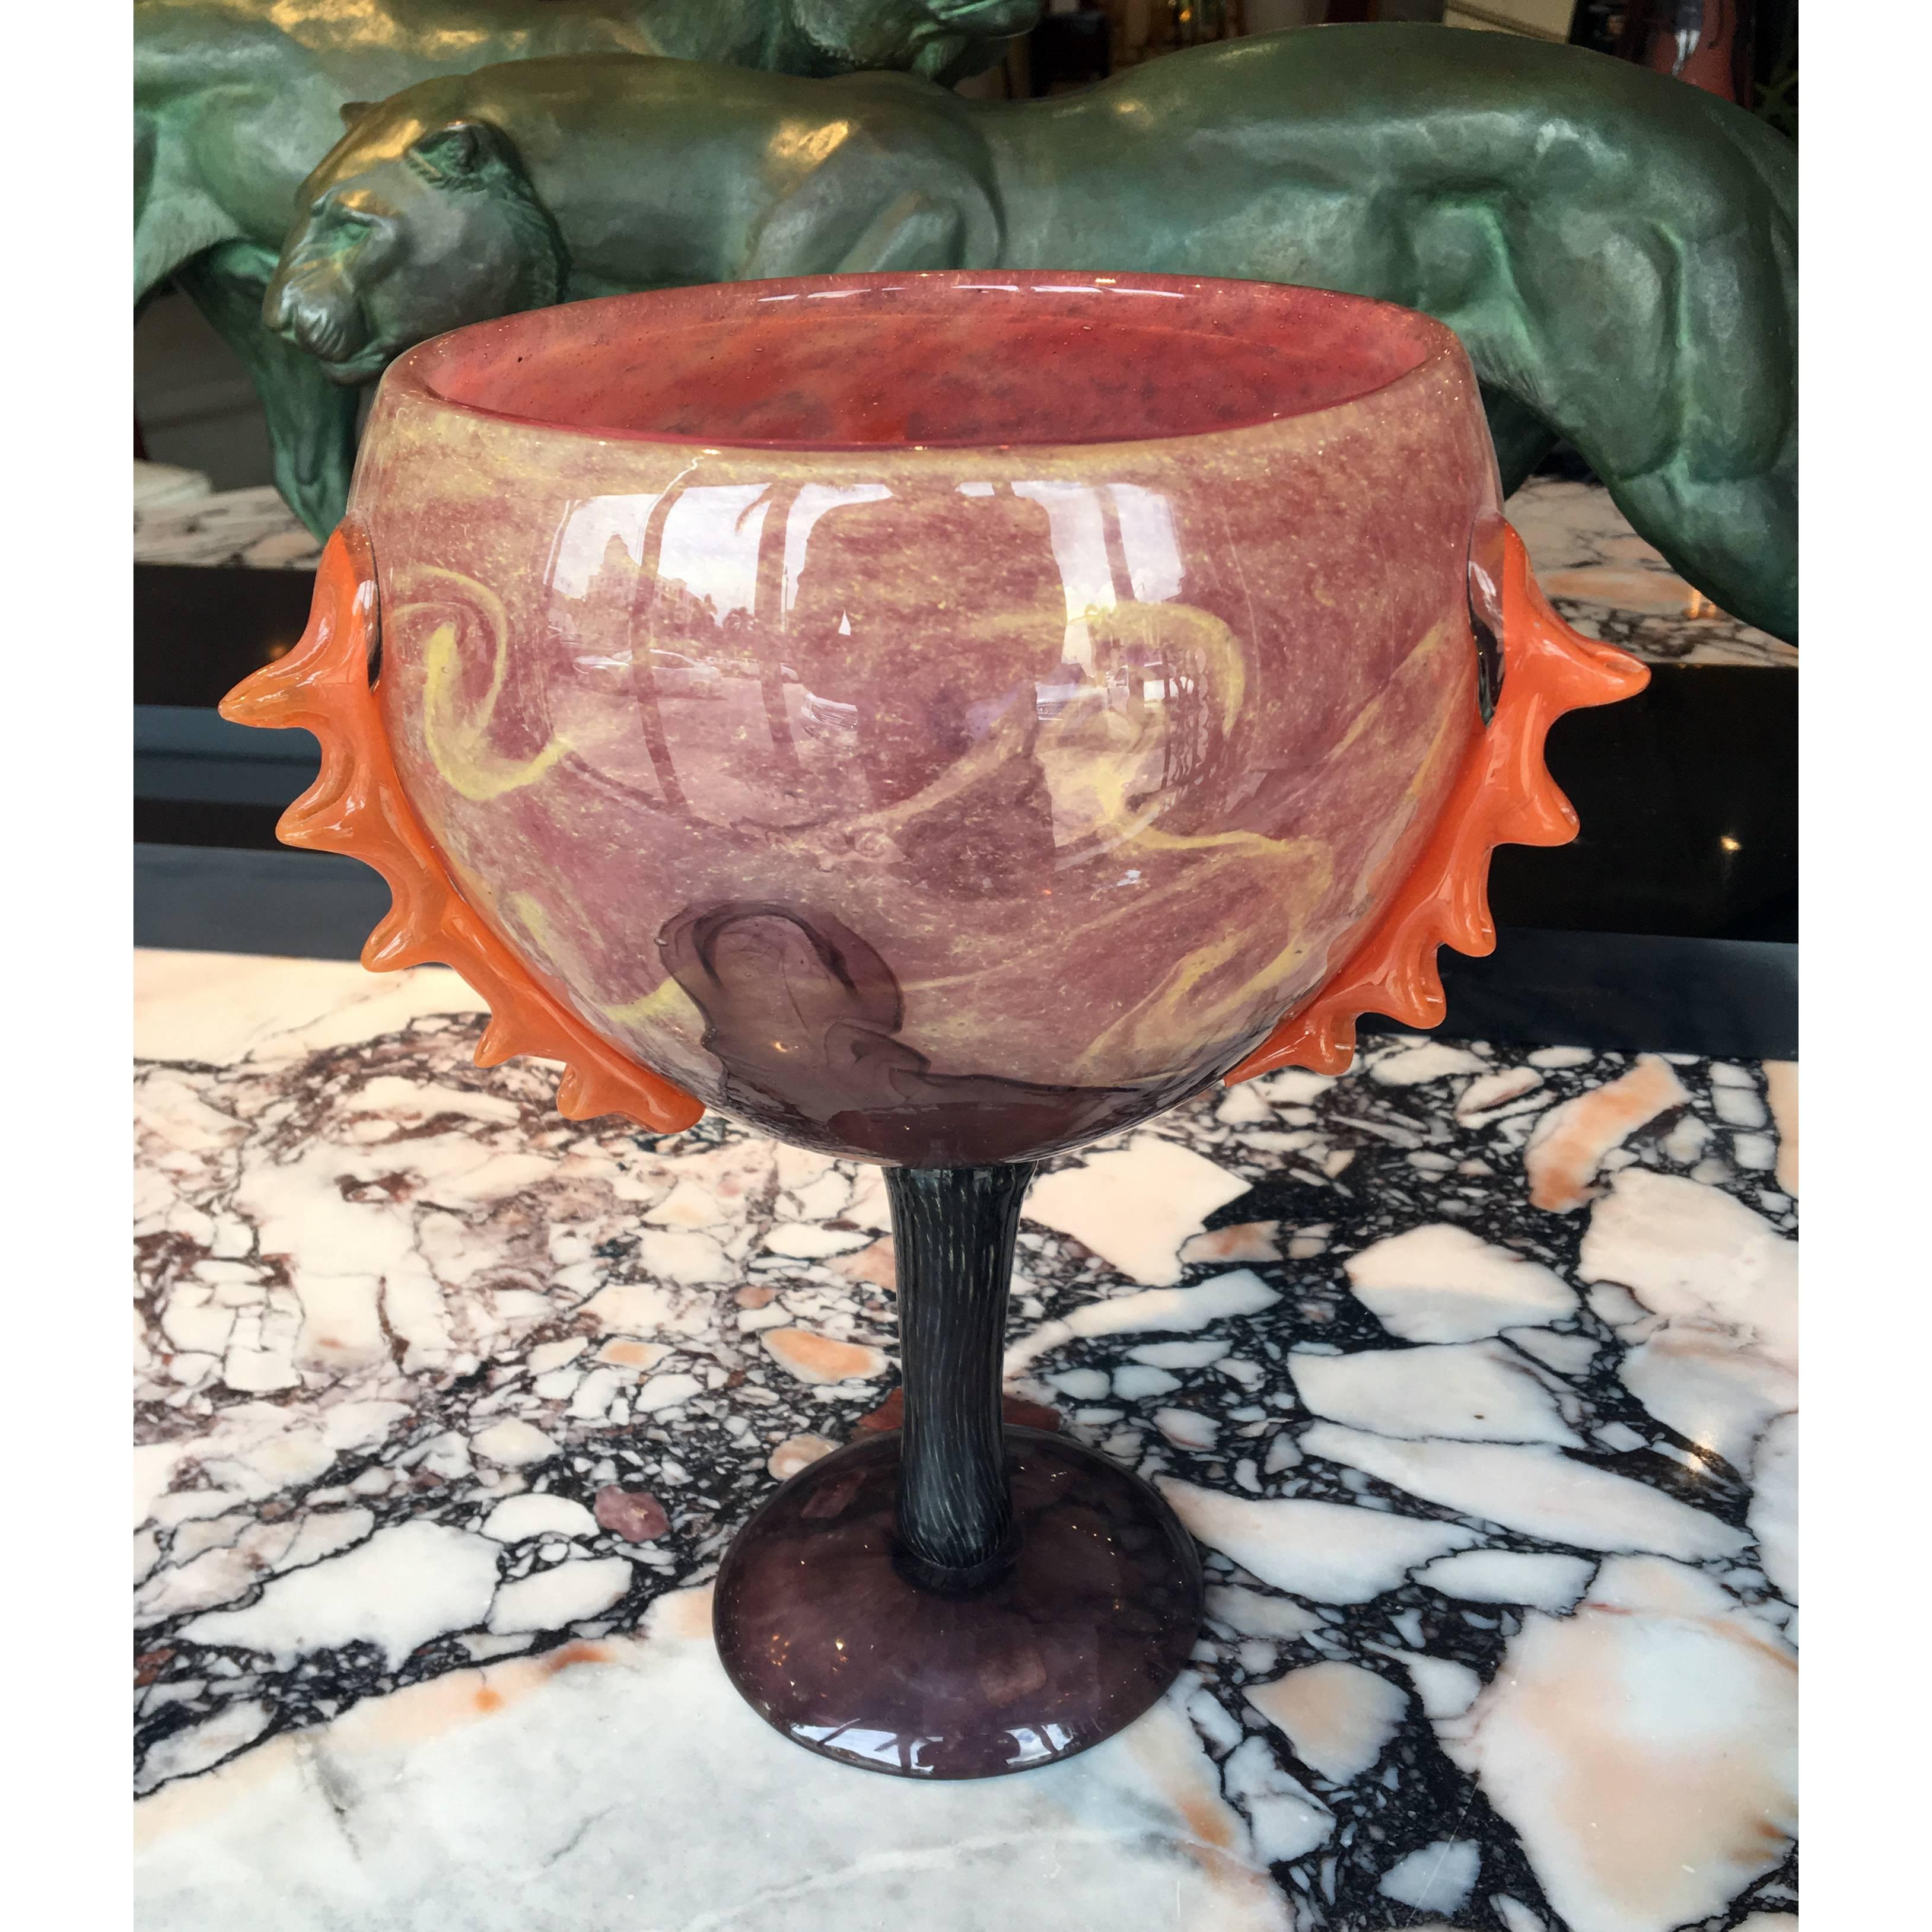 Art Deco glass tazza by Charles Schneider with purple and pink colored glass, with scallops of orange-powdered glass along the body.
Made in France
circa 1922
Signature: Schneider.